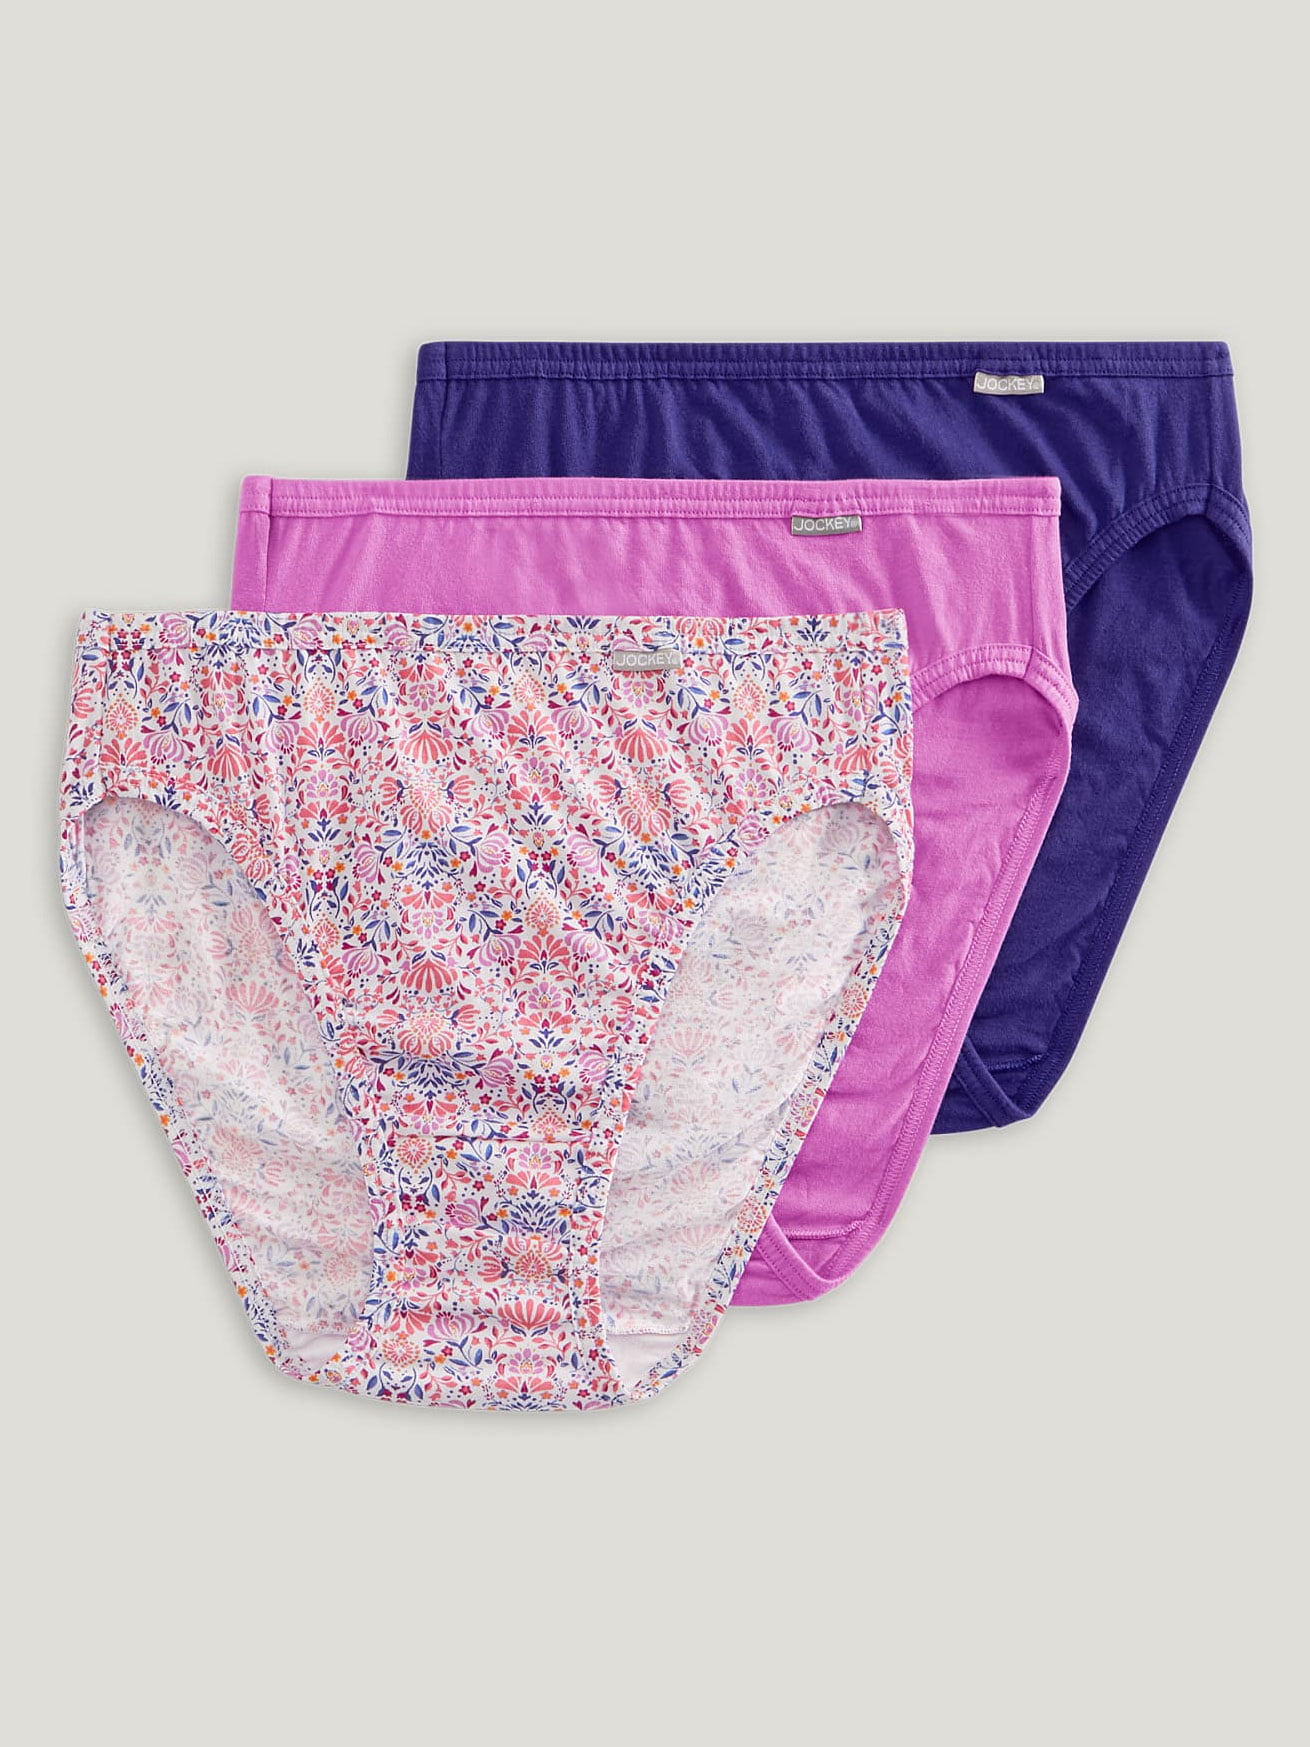 Details about   New 3 pack JOCKEY covered waistband 100% cotton FRENCH CUT LILAC PURPLE geo 